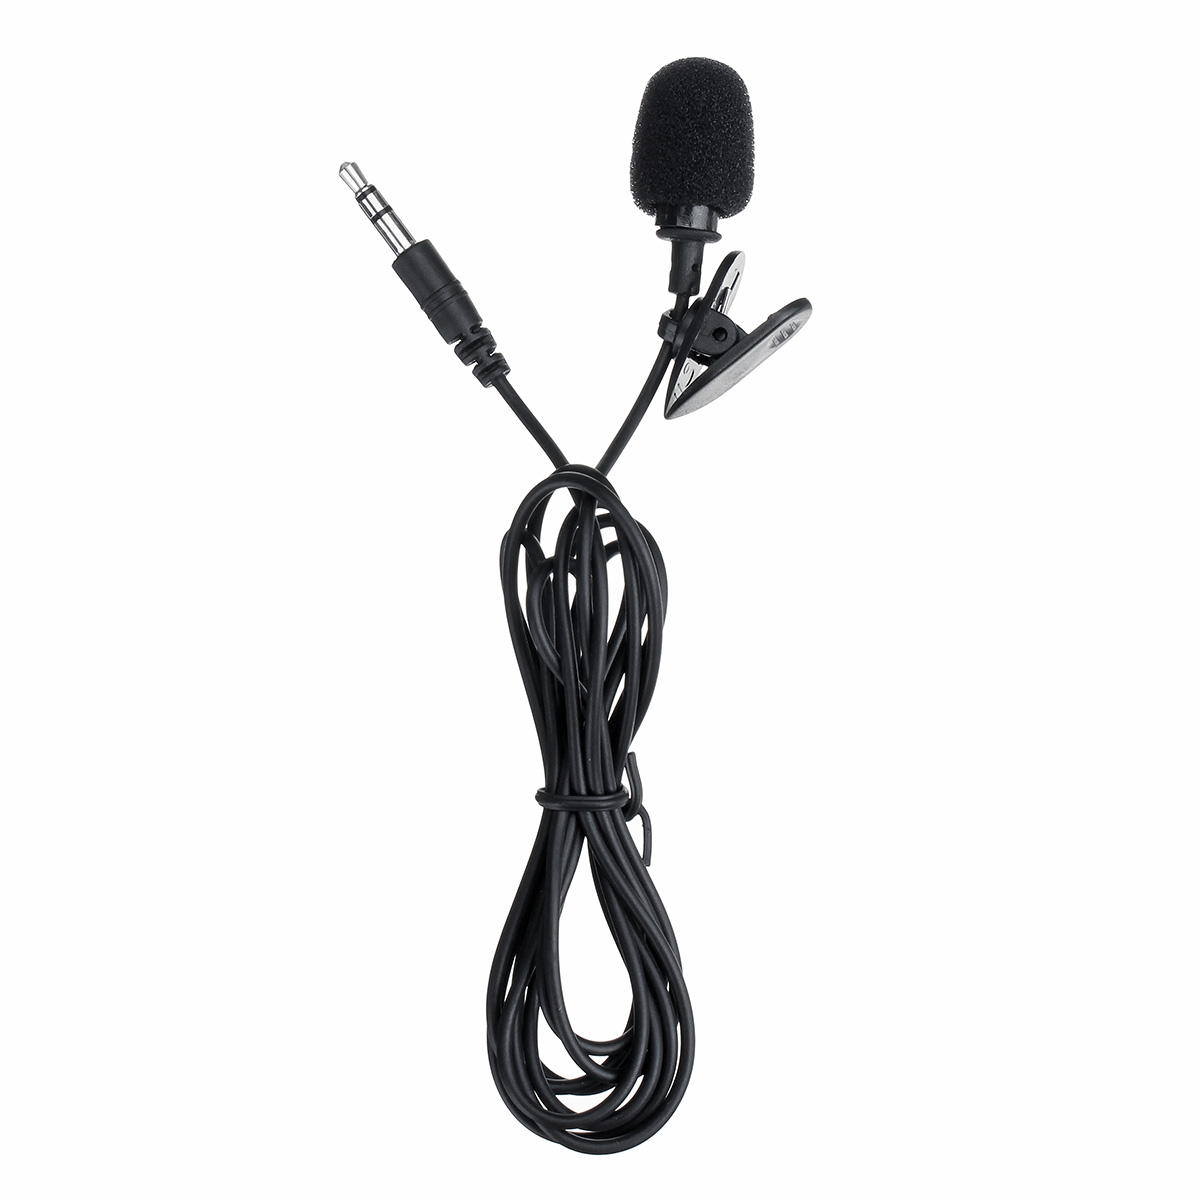 Bluetooth 5.0 Aux Cable Audio Adapter USB Handsfree with Microphone Lossless MIC - Auto GoShop